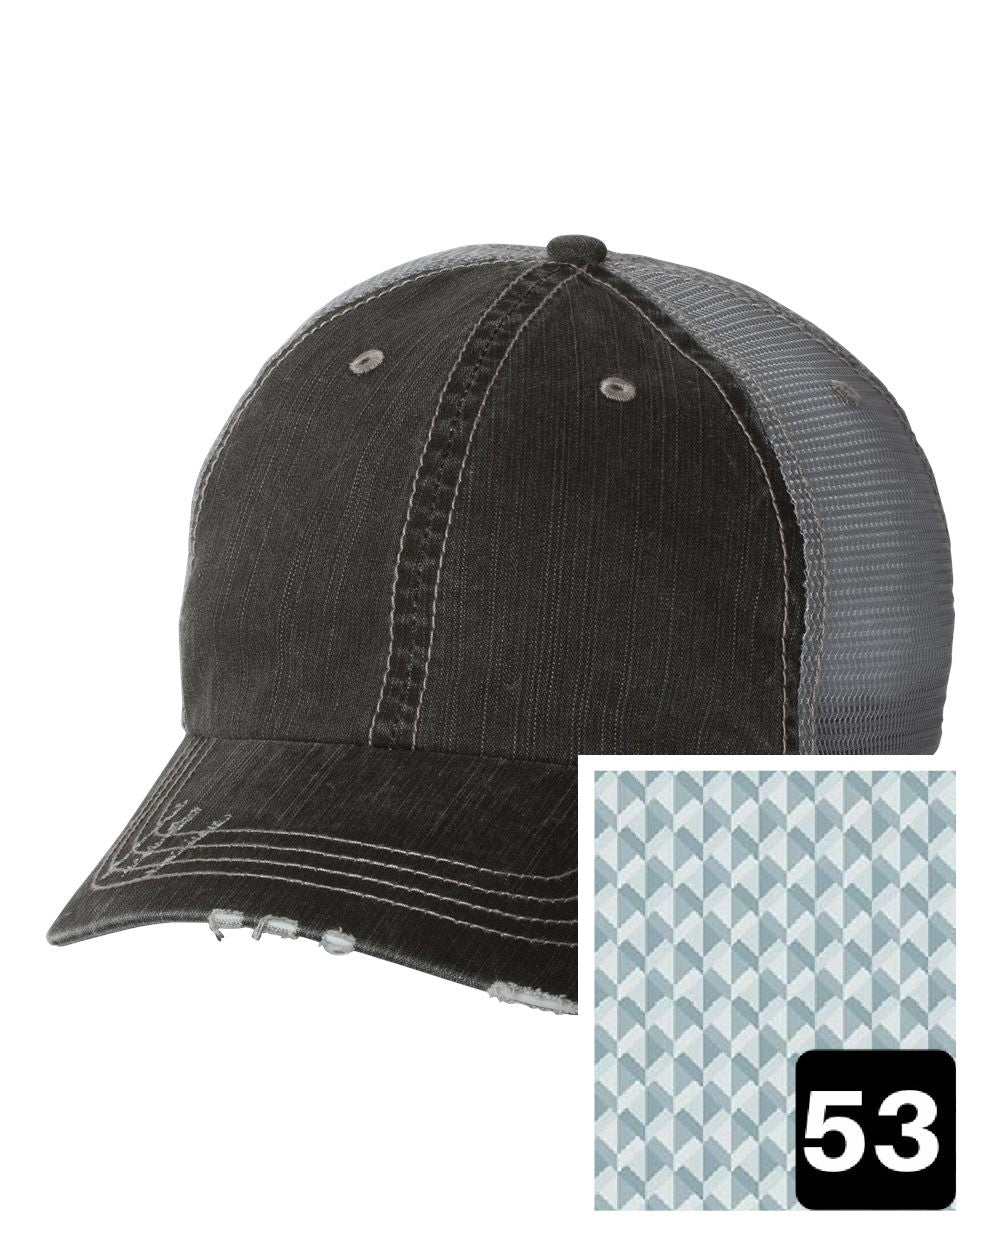 gray distressed trucker hat with multi-color stripe fabric state of Idaho